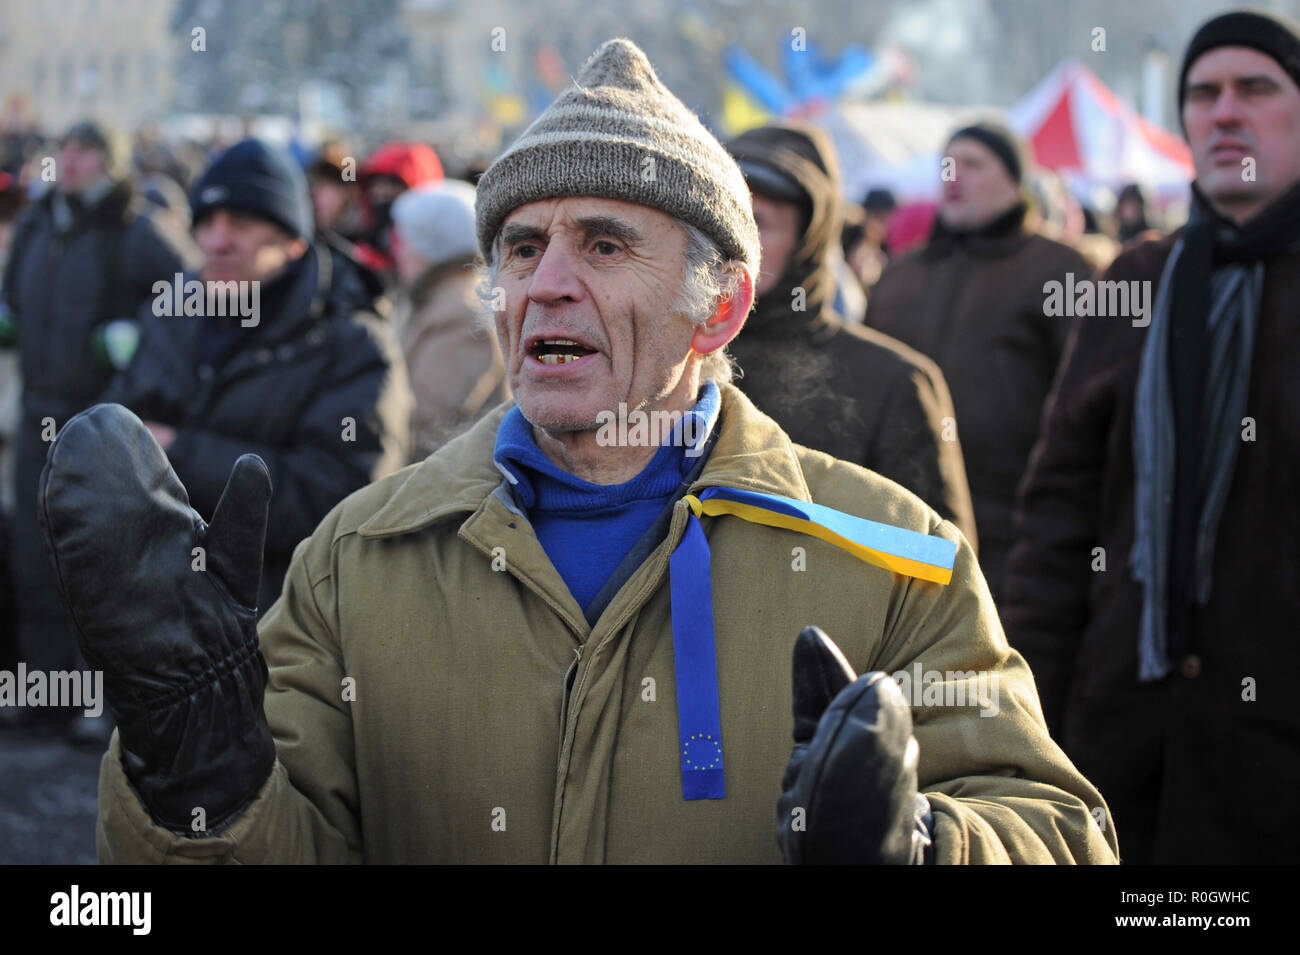 January 26, 2014 - Kiev, Ukraine: Anti-government protesters hold mass rallies on Kiev's Independence Square, known as Maidan, as a tense standoff with police continues in the streets nearby. Rassemblement de masse sur la place de l'Independance a Kiev, connue comme le Maidan, tandis que les rues avoisinantes sont herissees de barricades. *** FRANCE OUT / NO SALES TO FRENCH MEDIA *** Stock Photo